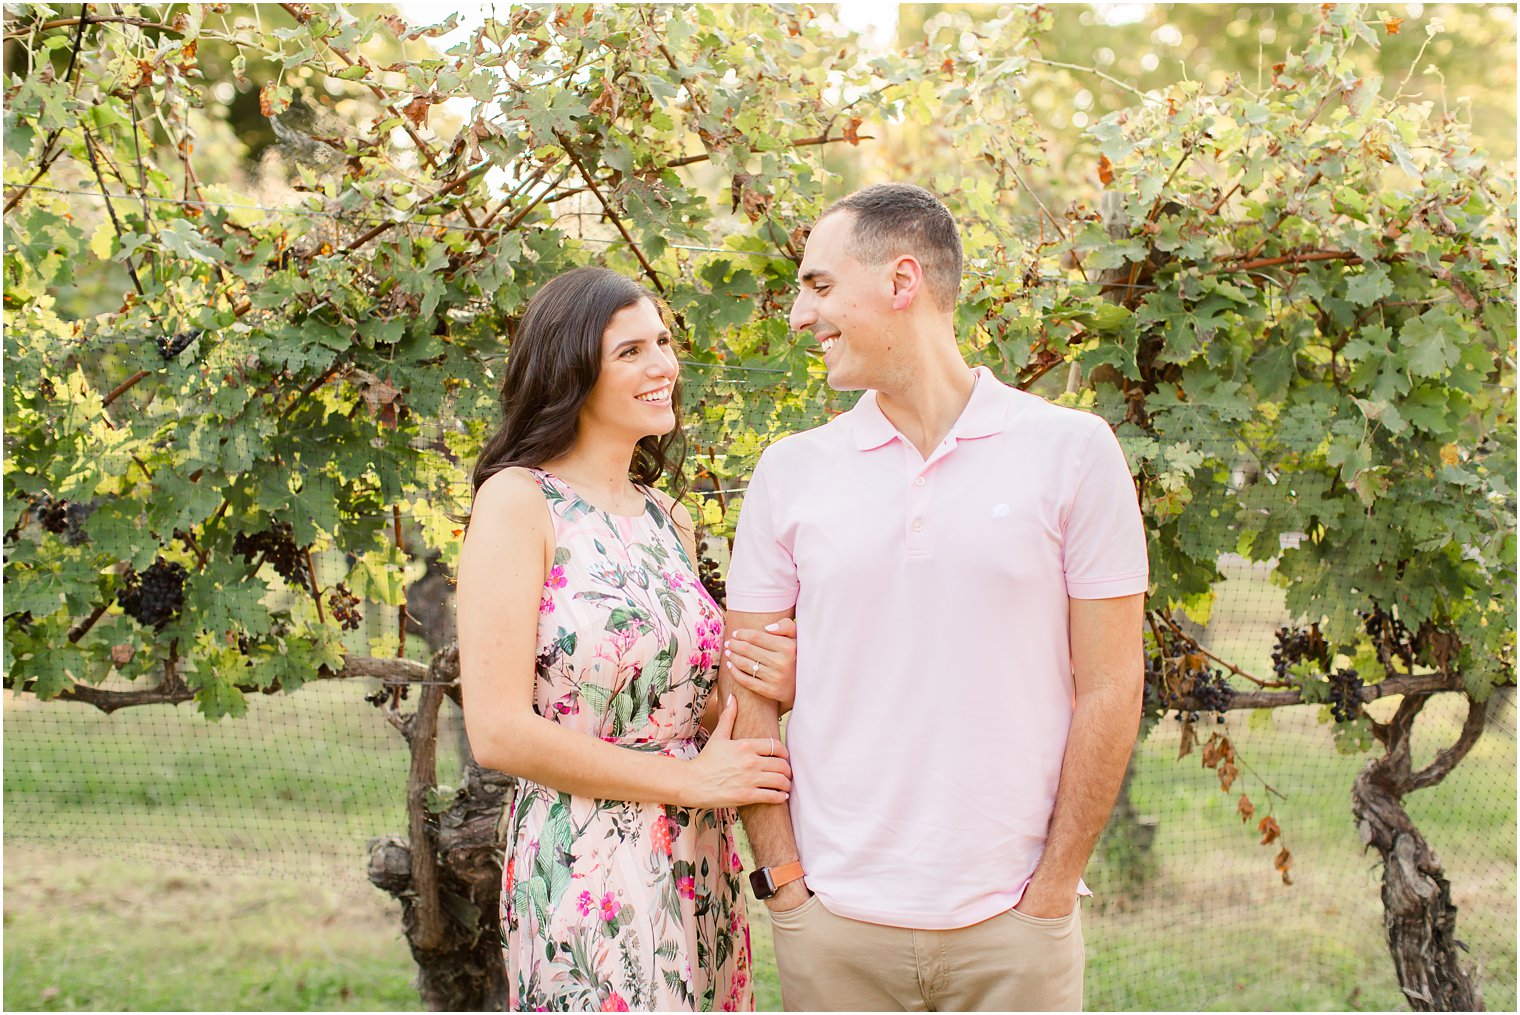 Cape May Engagement Session at Cape May Winery and Vineyard